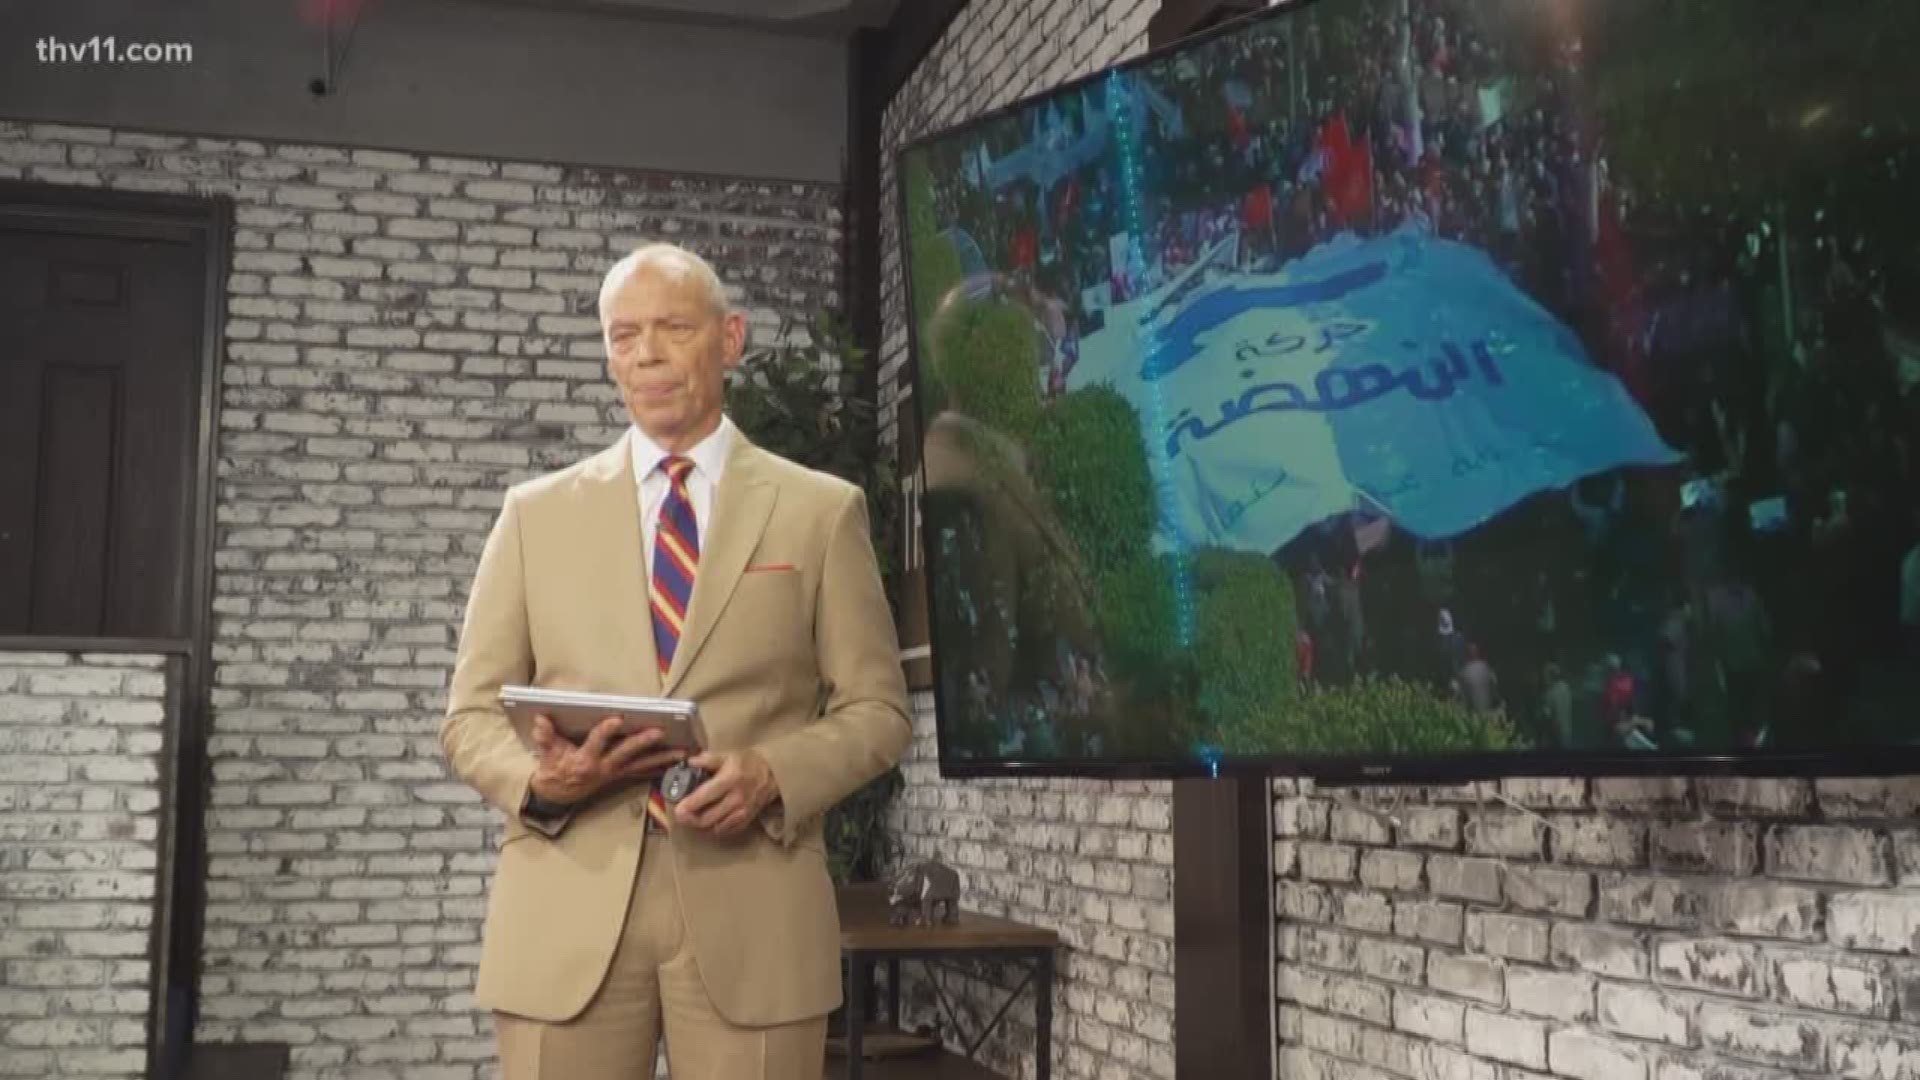 All week long, CBS and other major news organizations are joining together for a project entitled 'Covering Climate Now.' I think tonight is a good time to bring up Mohamed Bouazi and the Arkansas Levee Task Force.